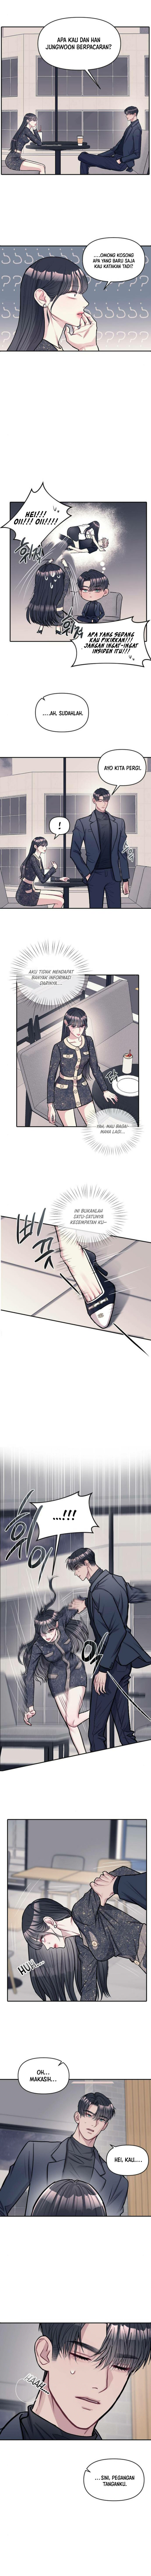 Undercover! Chaebol High School Chapter 06